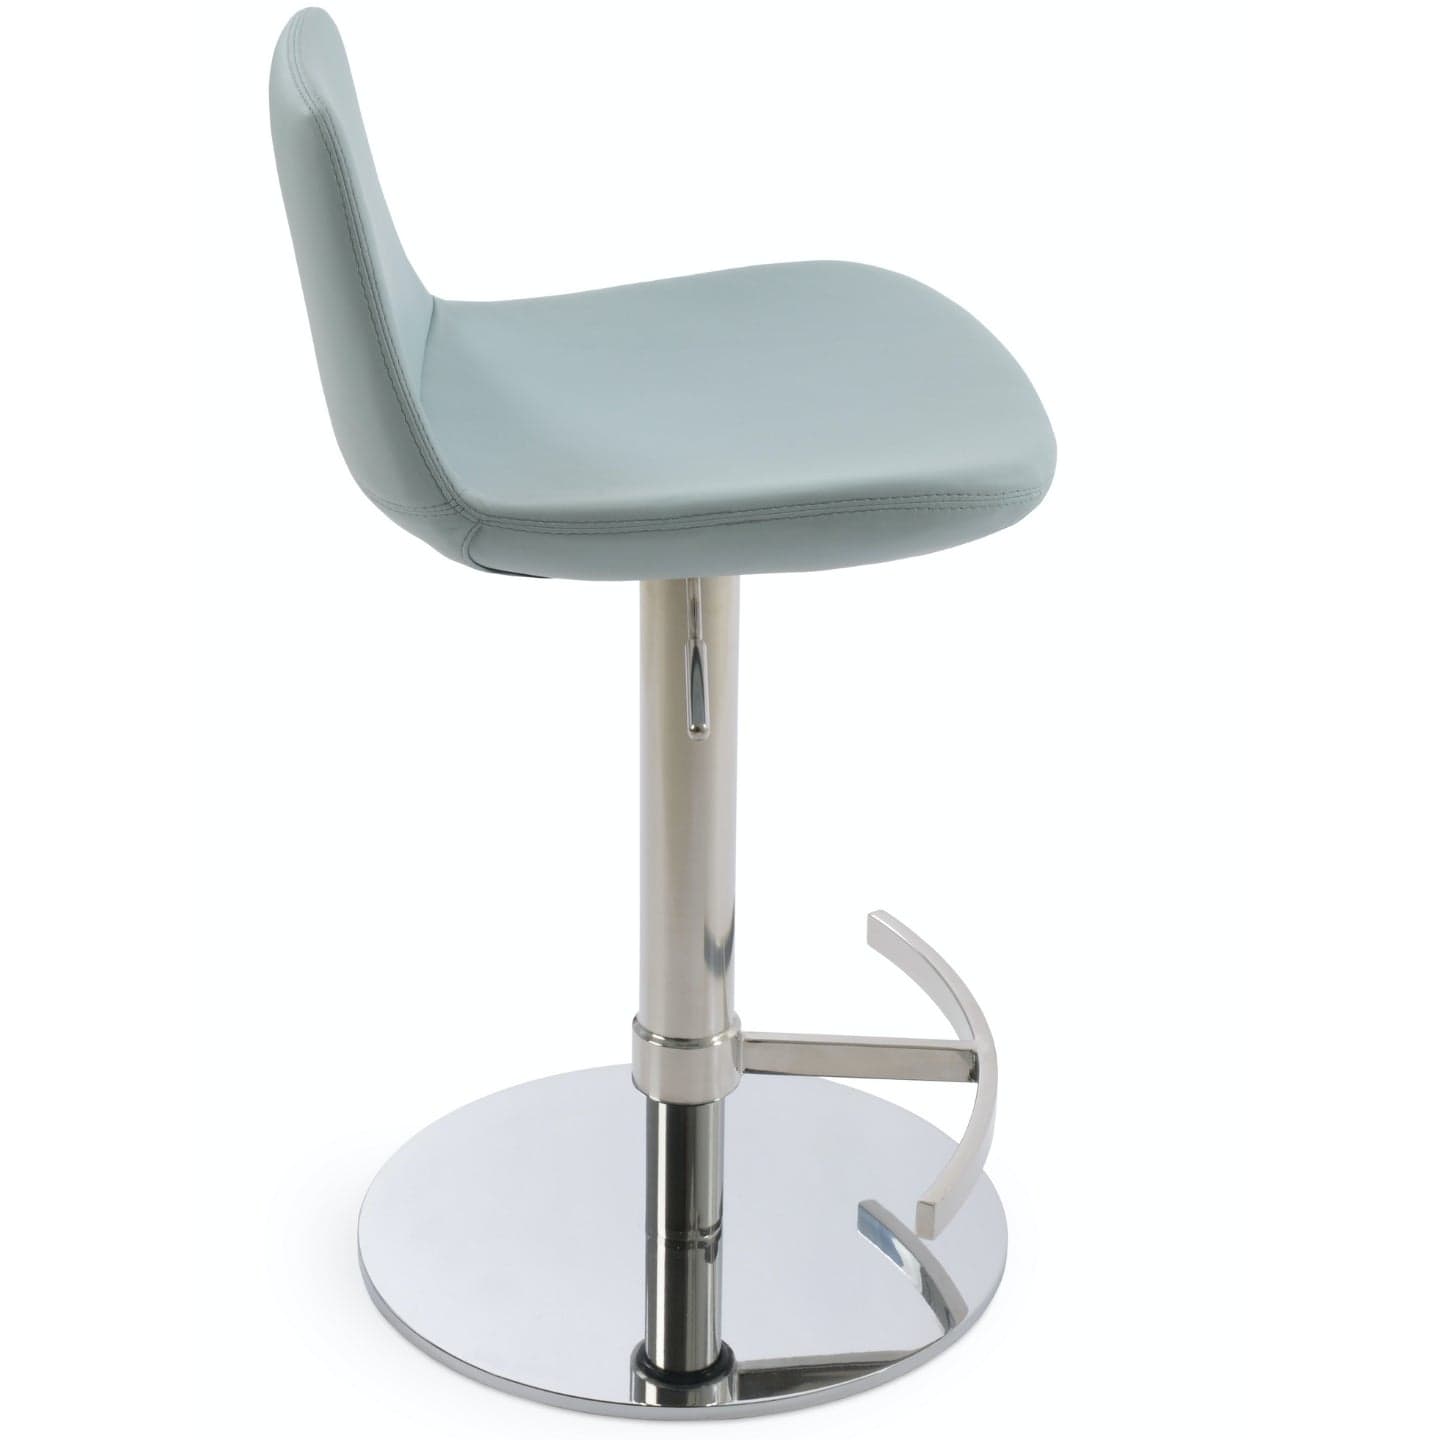 Soho Concept copy-of-copy-of-pera-piston-adjustable-swivel-faux-leather-seat-kitchen-counter-stool-in-sky-blue